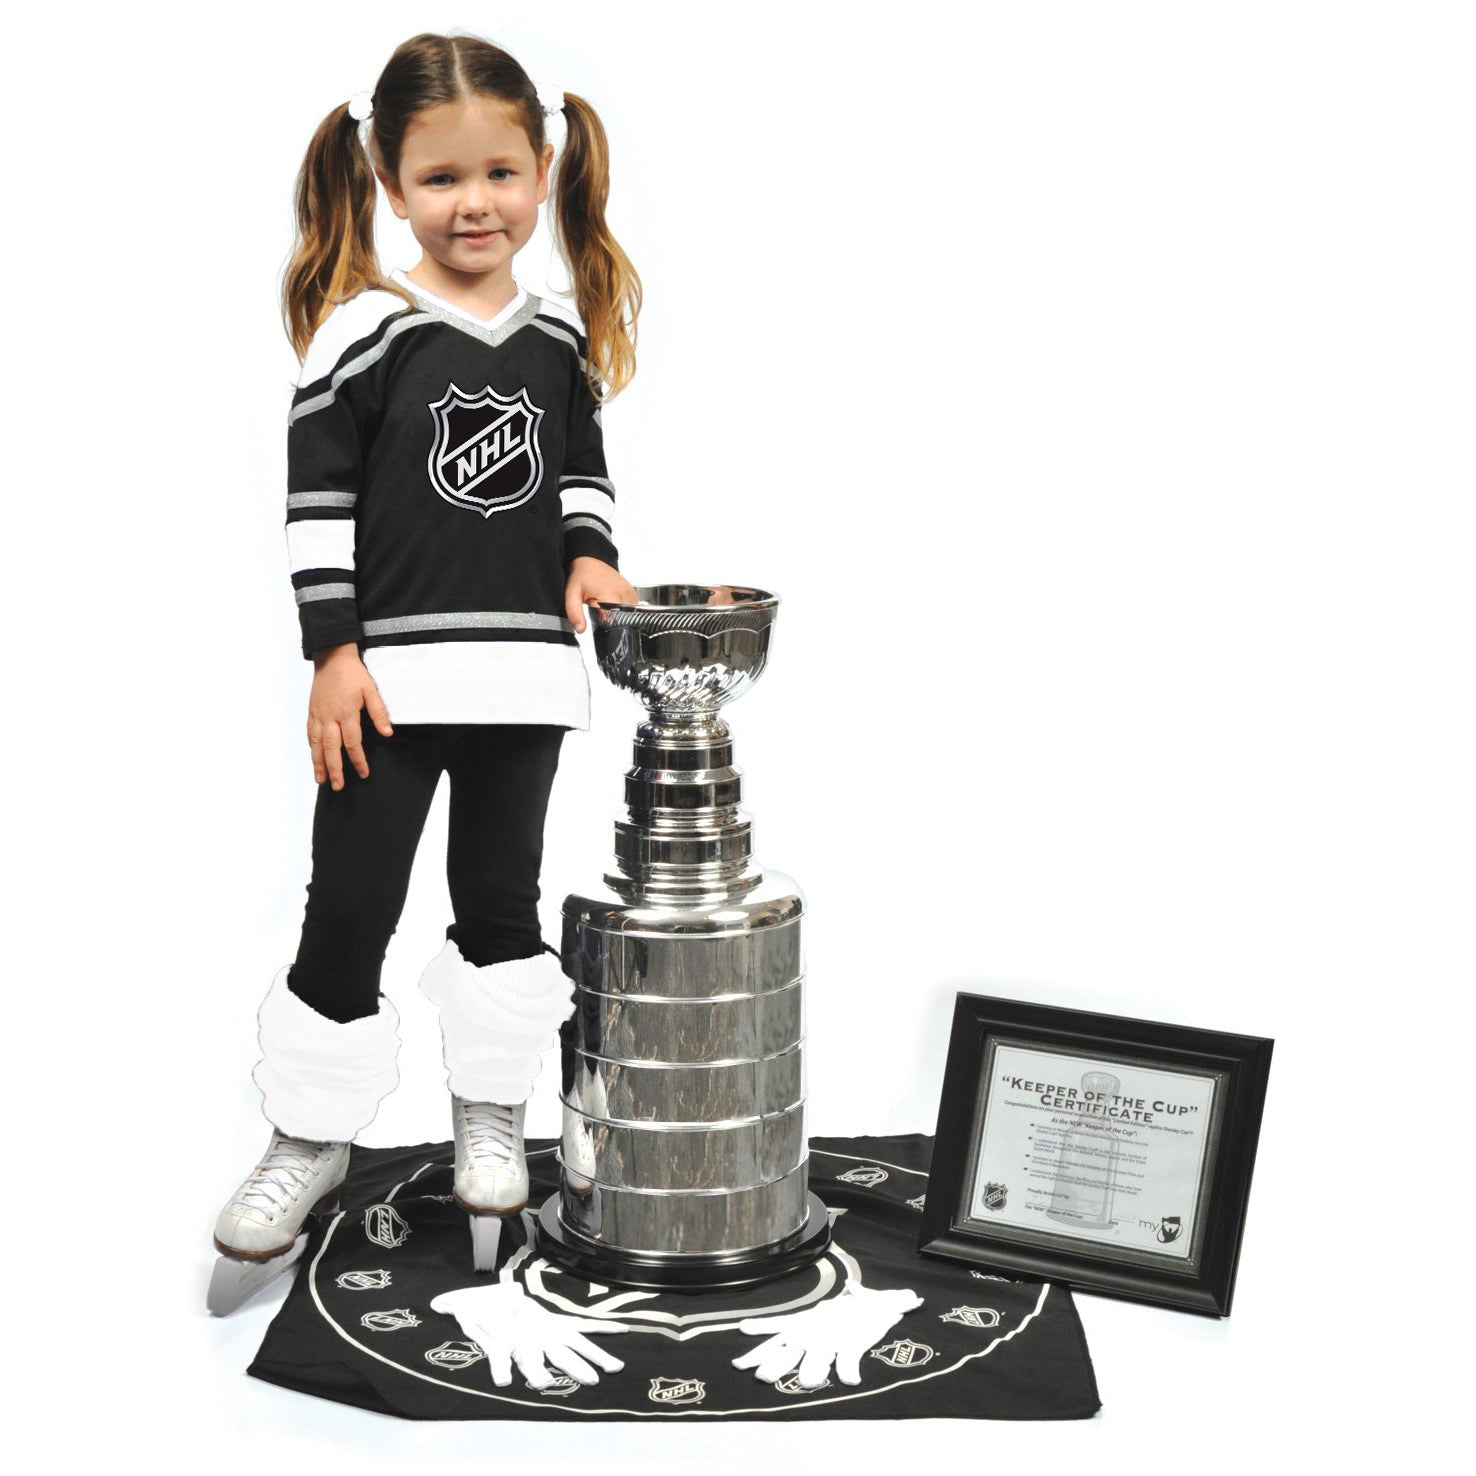 For a bargain price of $1,600 you can have your own fake Stanley Cup. How  does Instagram even allow these ads? @nhl @keeperofthecup…